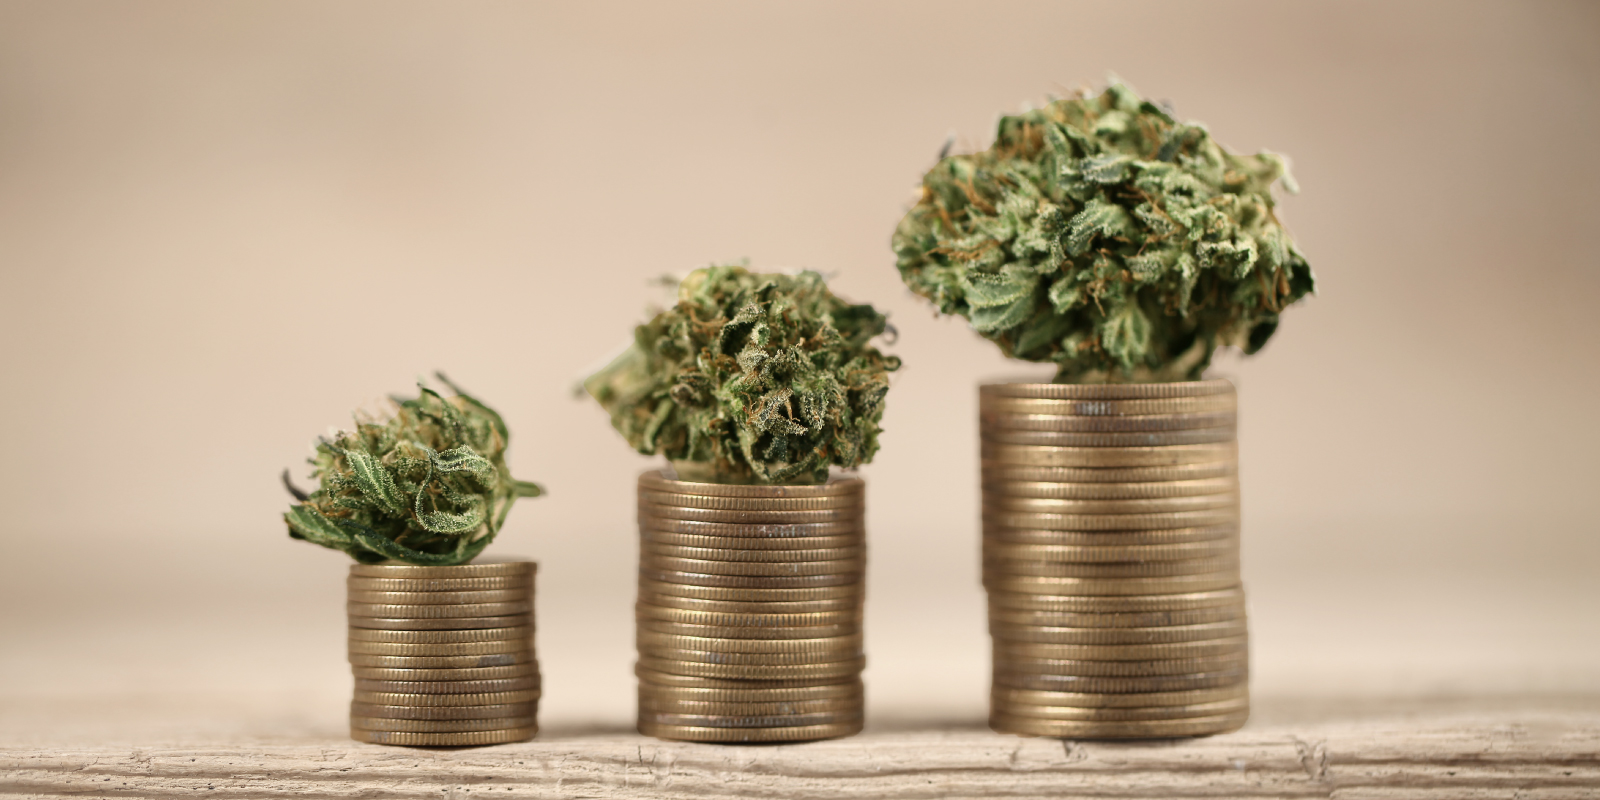 High times: Don't get burned by cannabis investing